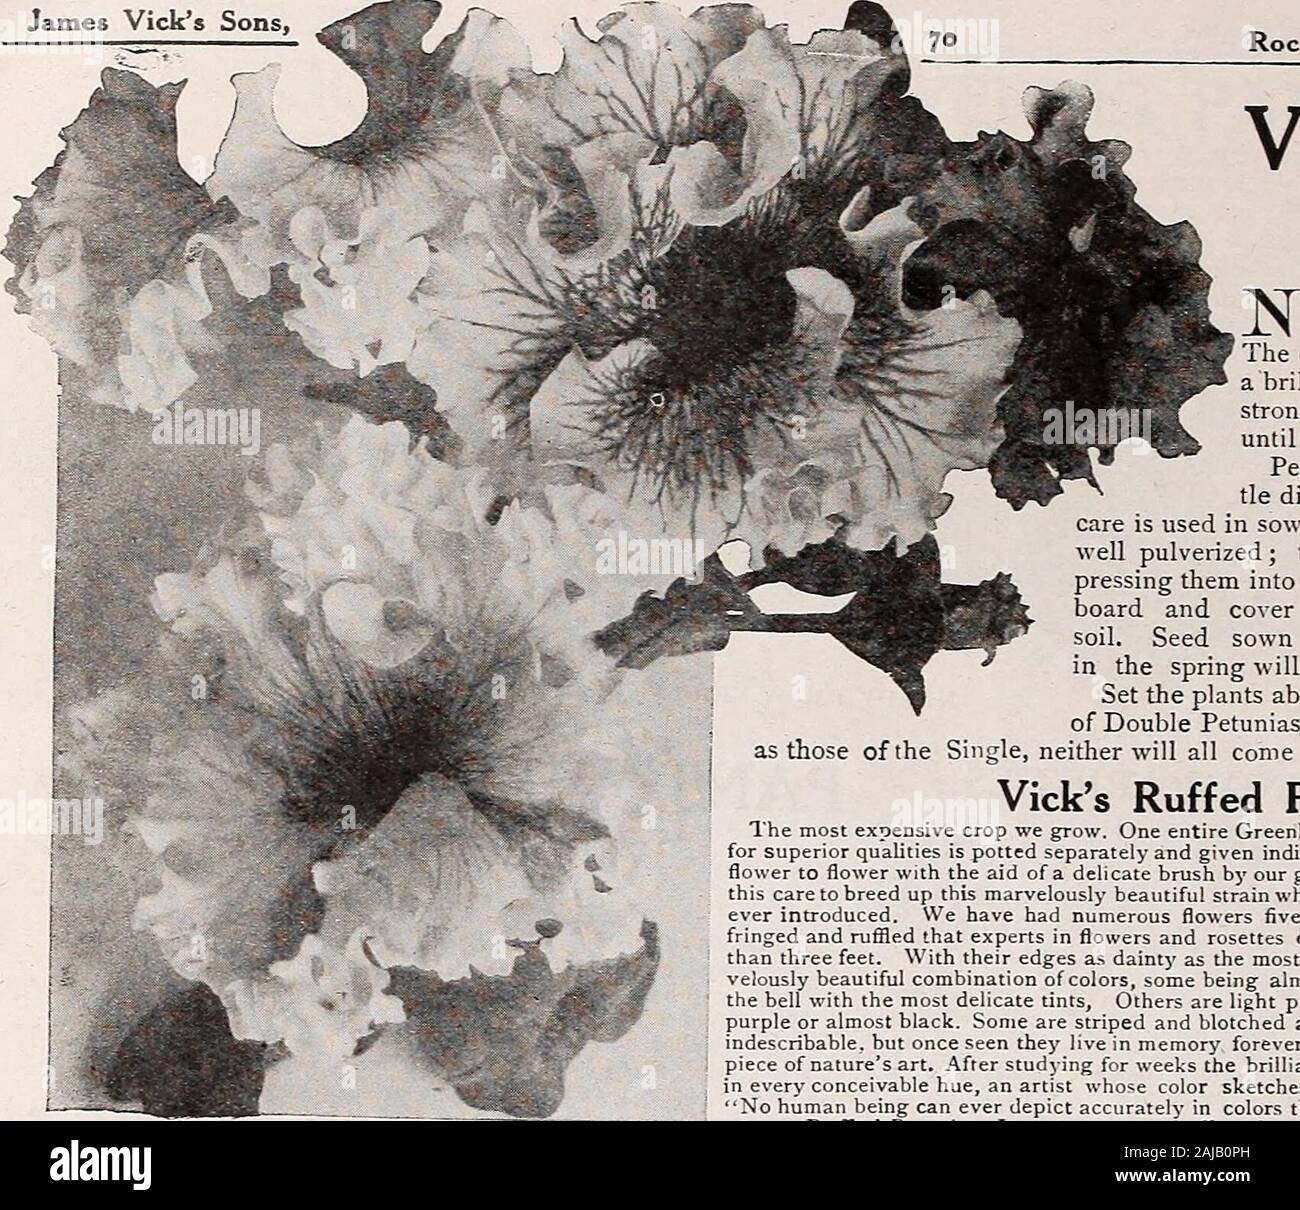 Vick's garden & floral guide : spring edition . GIANT-FLOWERING PANSYvegetables and flowers are given on each seed packet James Vicks Sons,. Rochester, N. Y., The Flower City VICKS RUFFLED PETUNIAS Single-Fowered Bedding Petunias Bedding varieties are unsurpassed for massing. They will make a mostshowy bed, giving a profusion of flowers from early summer until severe frost. Blotched and Striped, very symmetrically marked Pkt 10 Countess of Ellsmere. Dark rose, with fine white throat is General Dodds. Beautiful dark red 10 Rosy Morn. Dainty soft carmine-pink ; white throat; fine for border . 10 Stock Photo